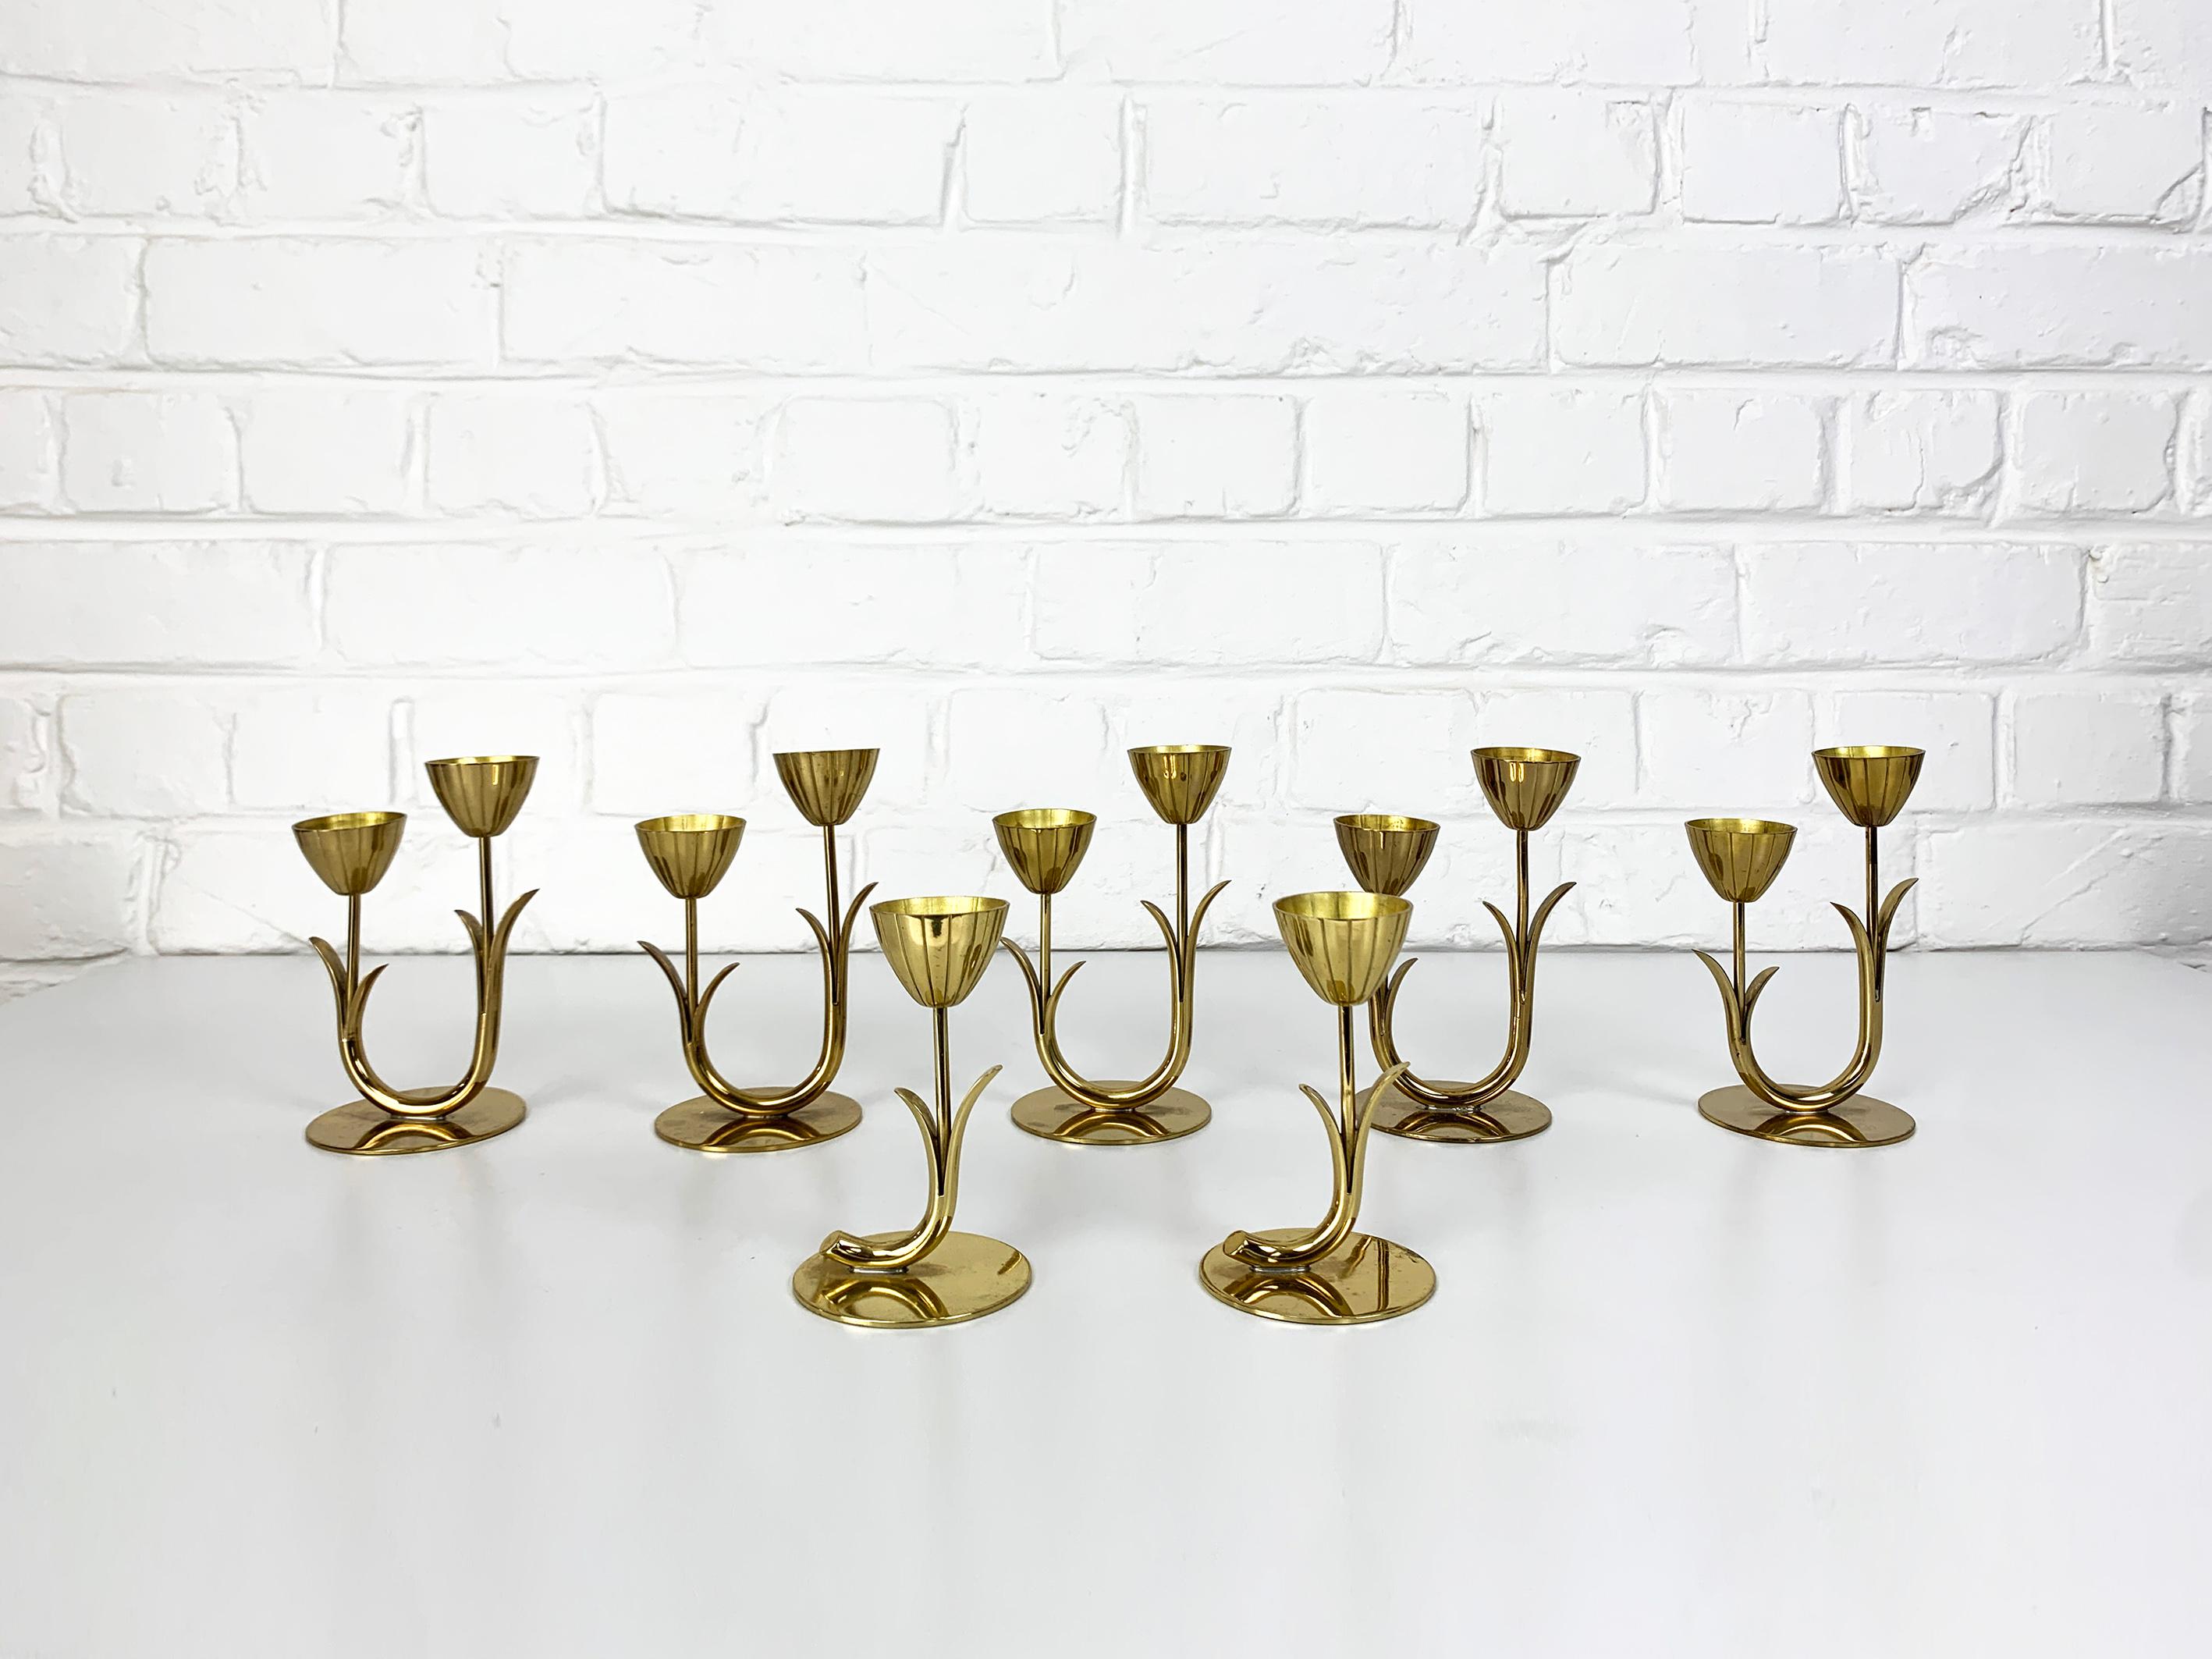 Set of 7 Swedish Modernist candelabra by Gunnar Ander. Produced by Ystad-Metall, located in the town of Ystad in Sweden. 

Candle-holders in solid brass. Organic design of stylised flowers and leaves attached to a curved stem and placed on a